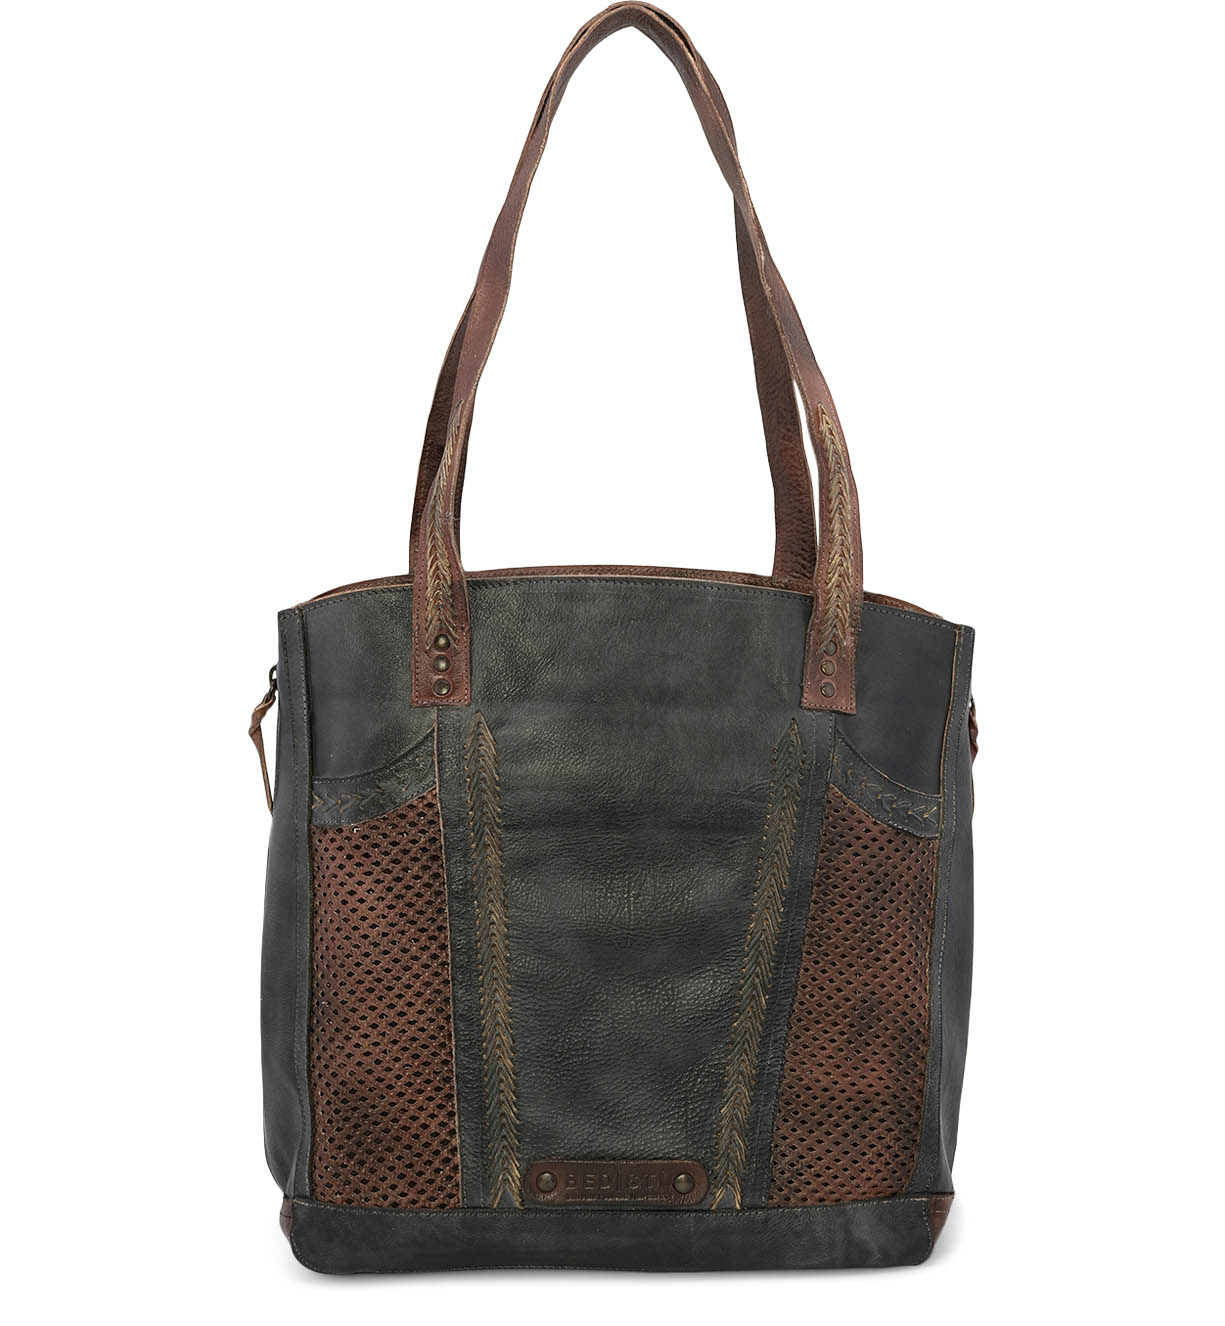 An Amelie leather tote bag by Bed Stu.